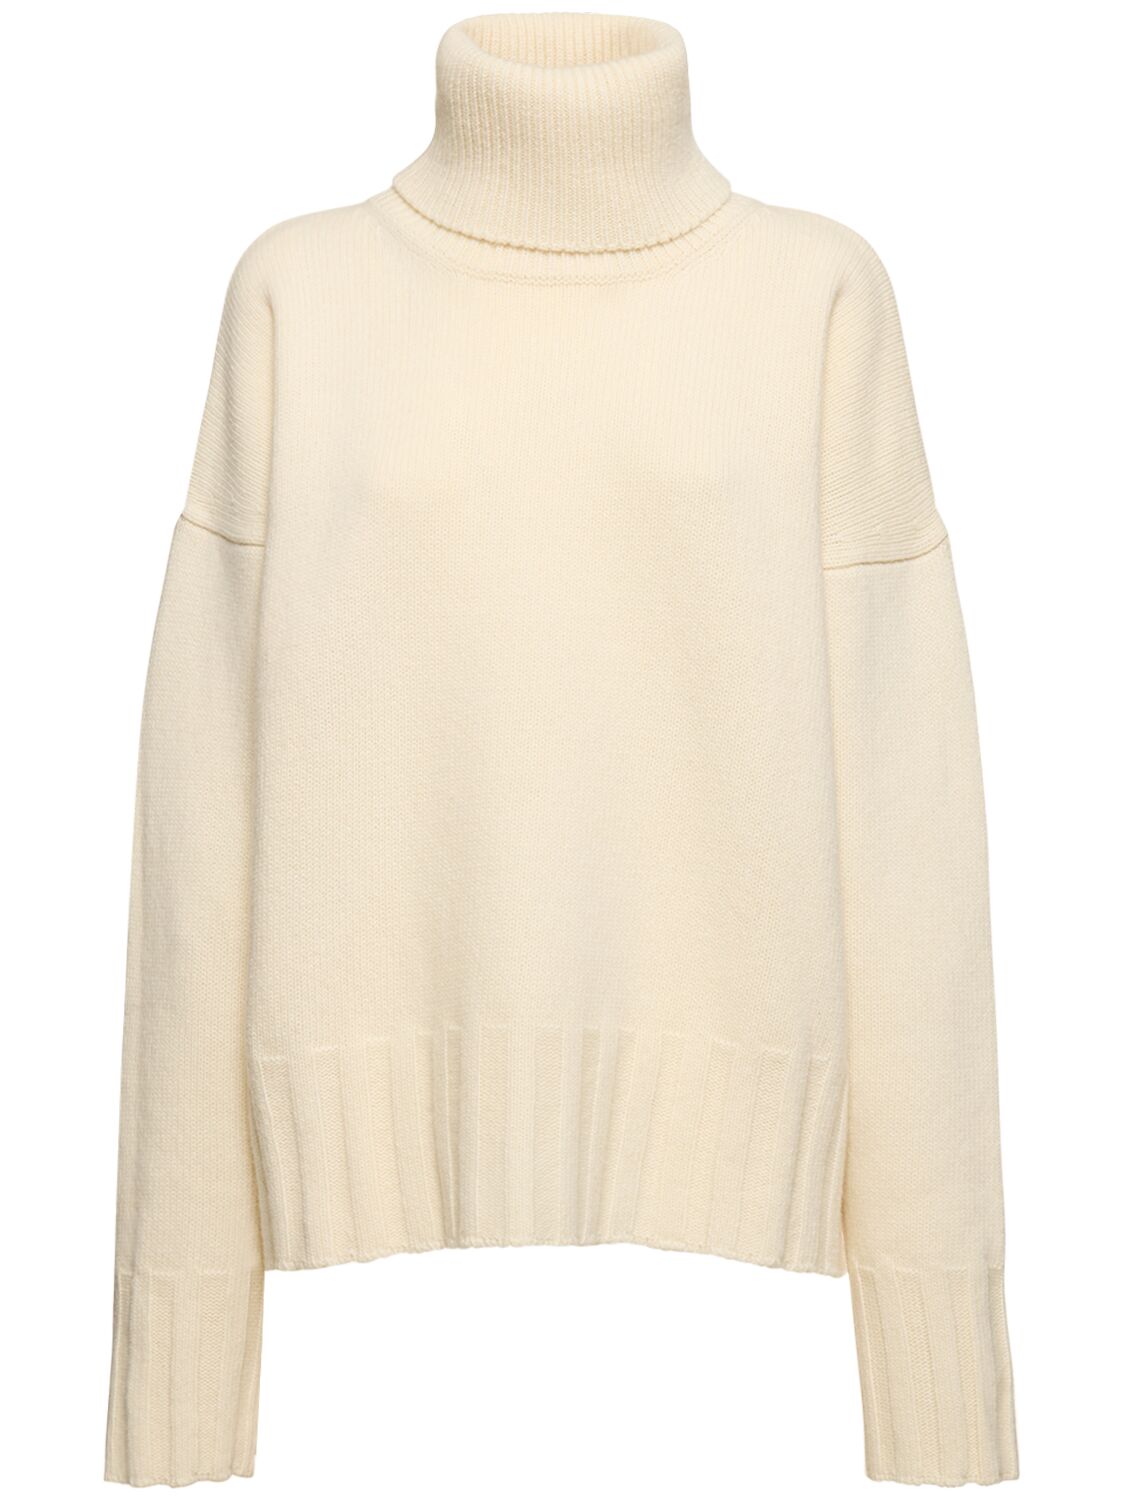 Image of Ely Wool Knit Turtleneck Sweater